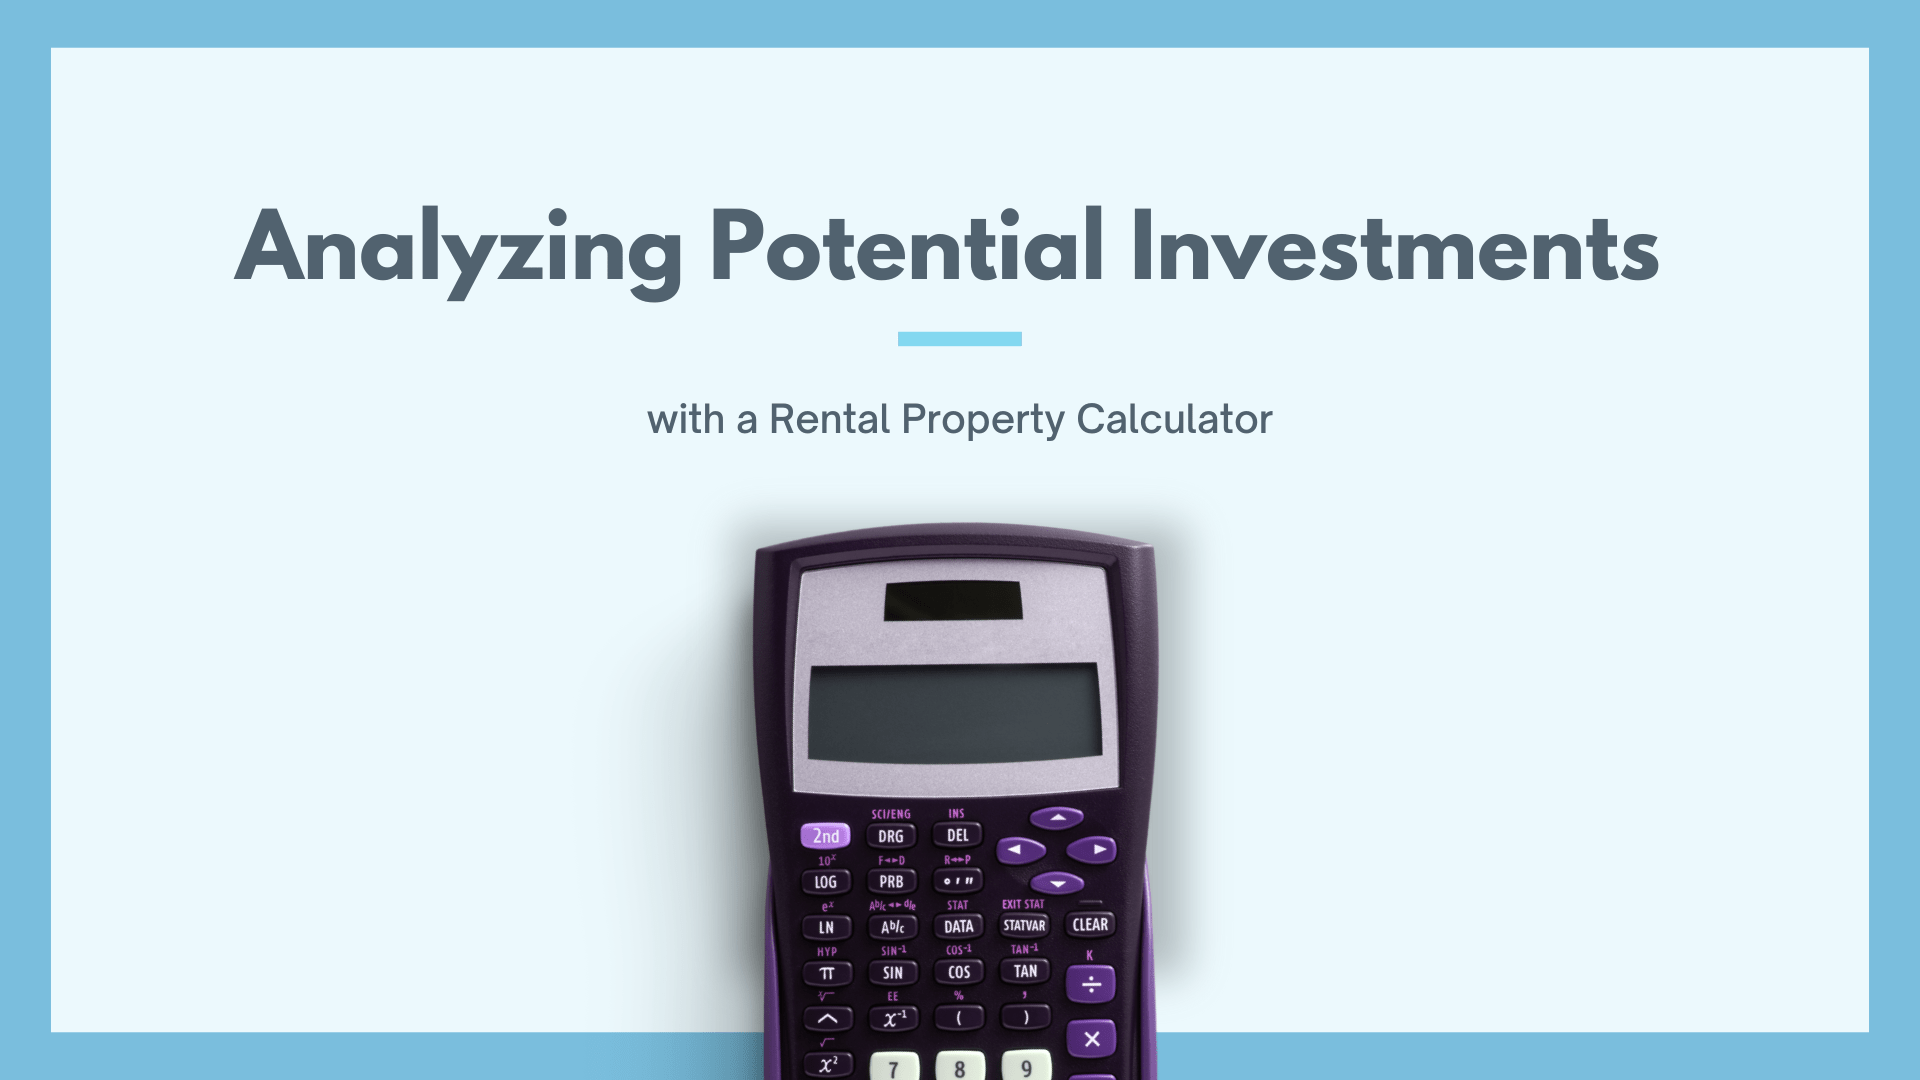 rental-property-calculators-to-analyze-potential-investments